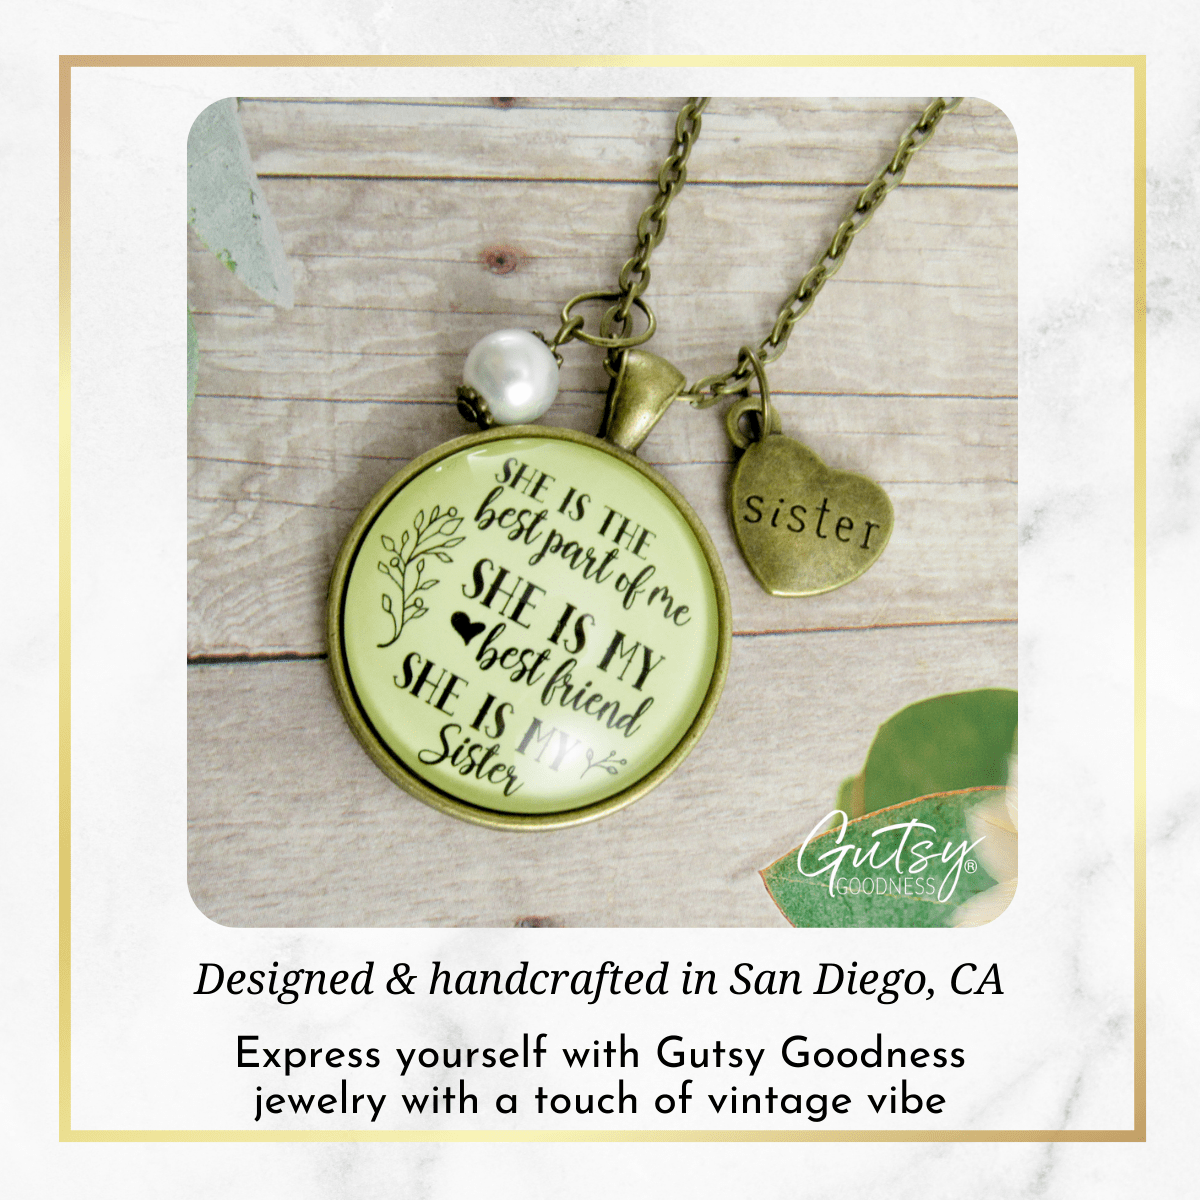 Gutsy Goodness Love My Sister Necklace She is Best Part Friendship Jewelry Gift - Gutsy Goodness Handmade Jewelry;Love My Sister Necklace She Is Best Part Friendship Jewelry Gift - Gutsy Goodness Handmade Jewelry Gifts